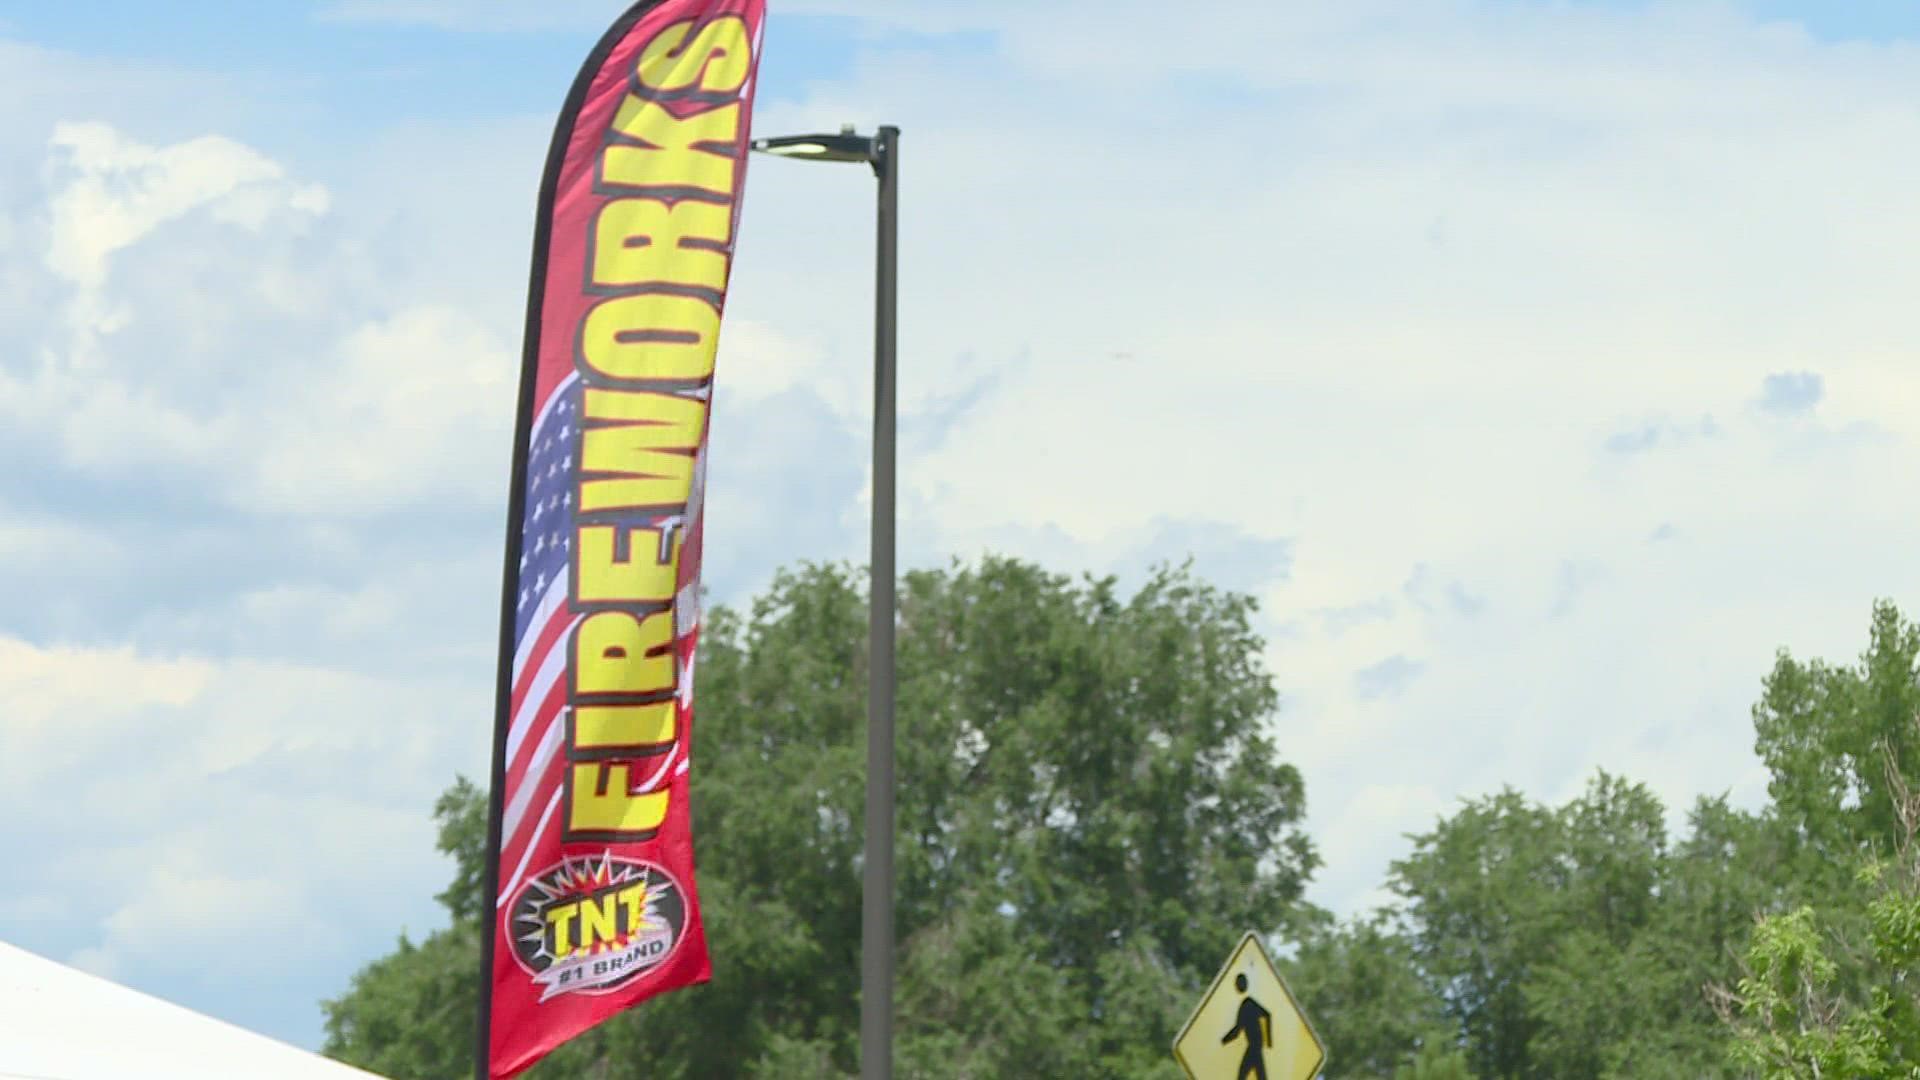 The City of Longmont has established an illegal fireworks hotline for people to call.